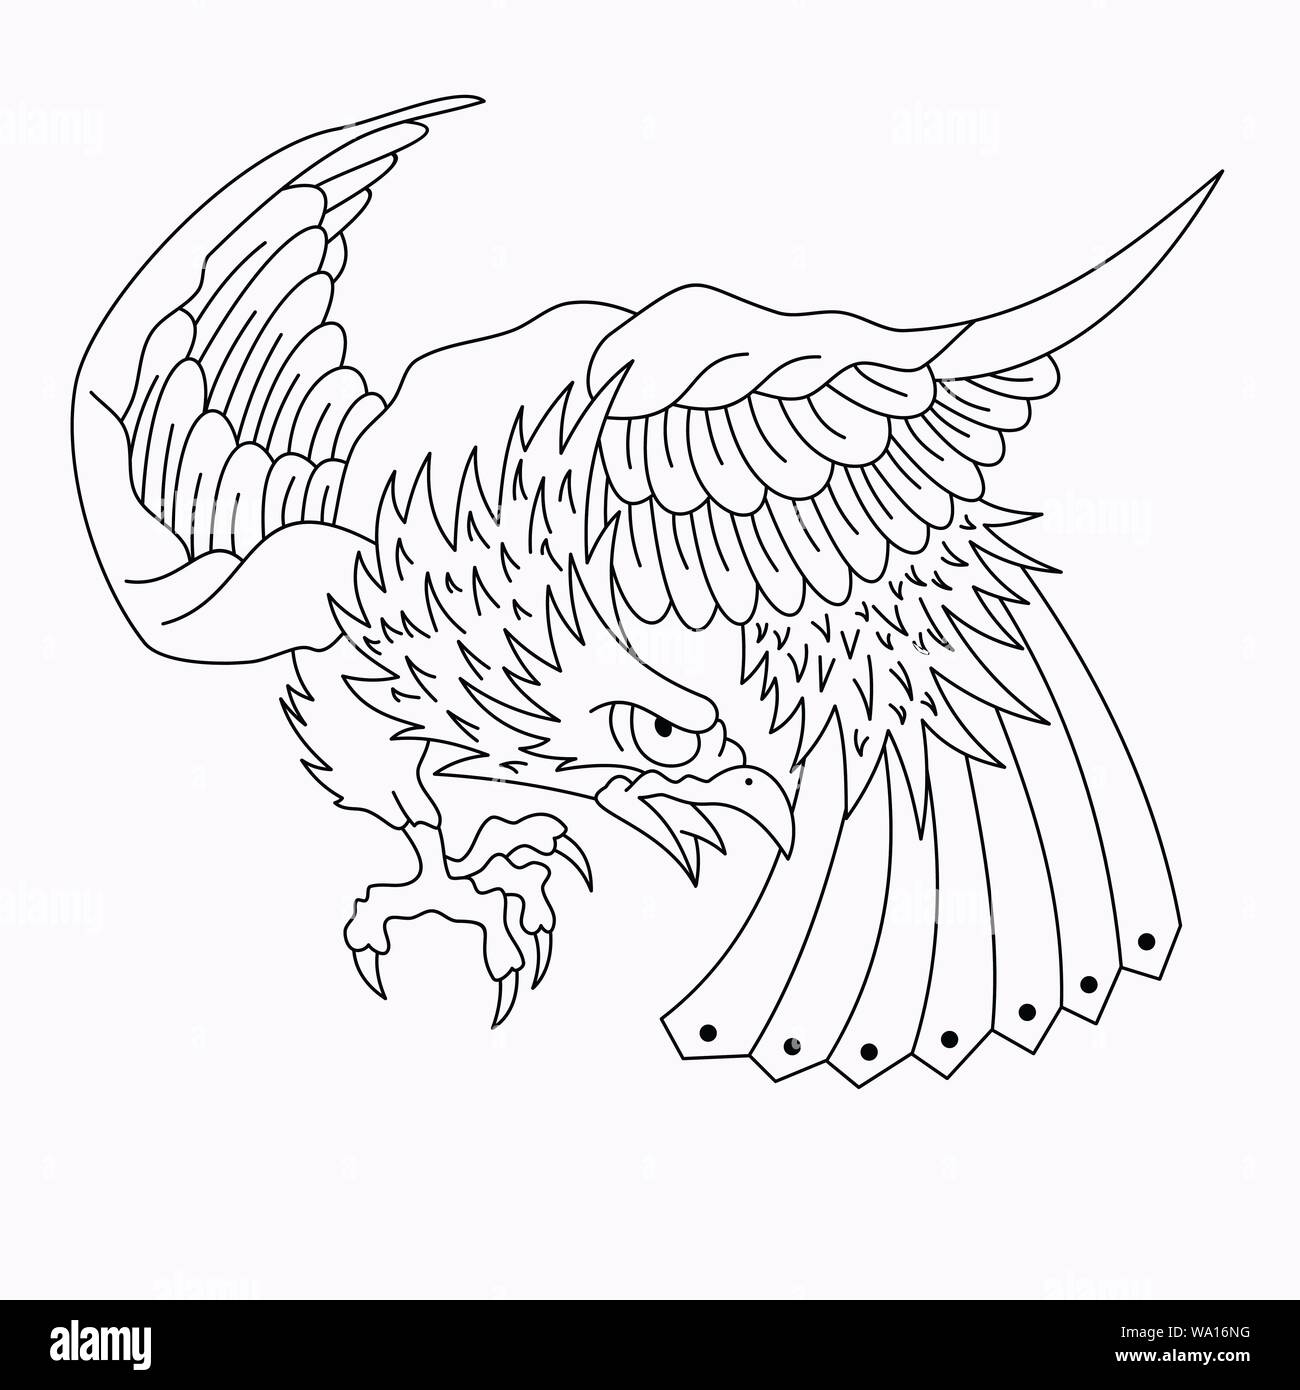 139 Aquila Tattoo Images, Stock Photos, 3D objects, & Vectors | Shutterstock